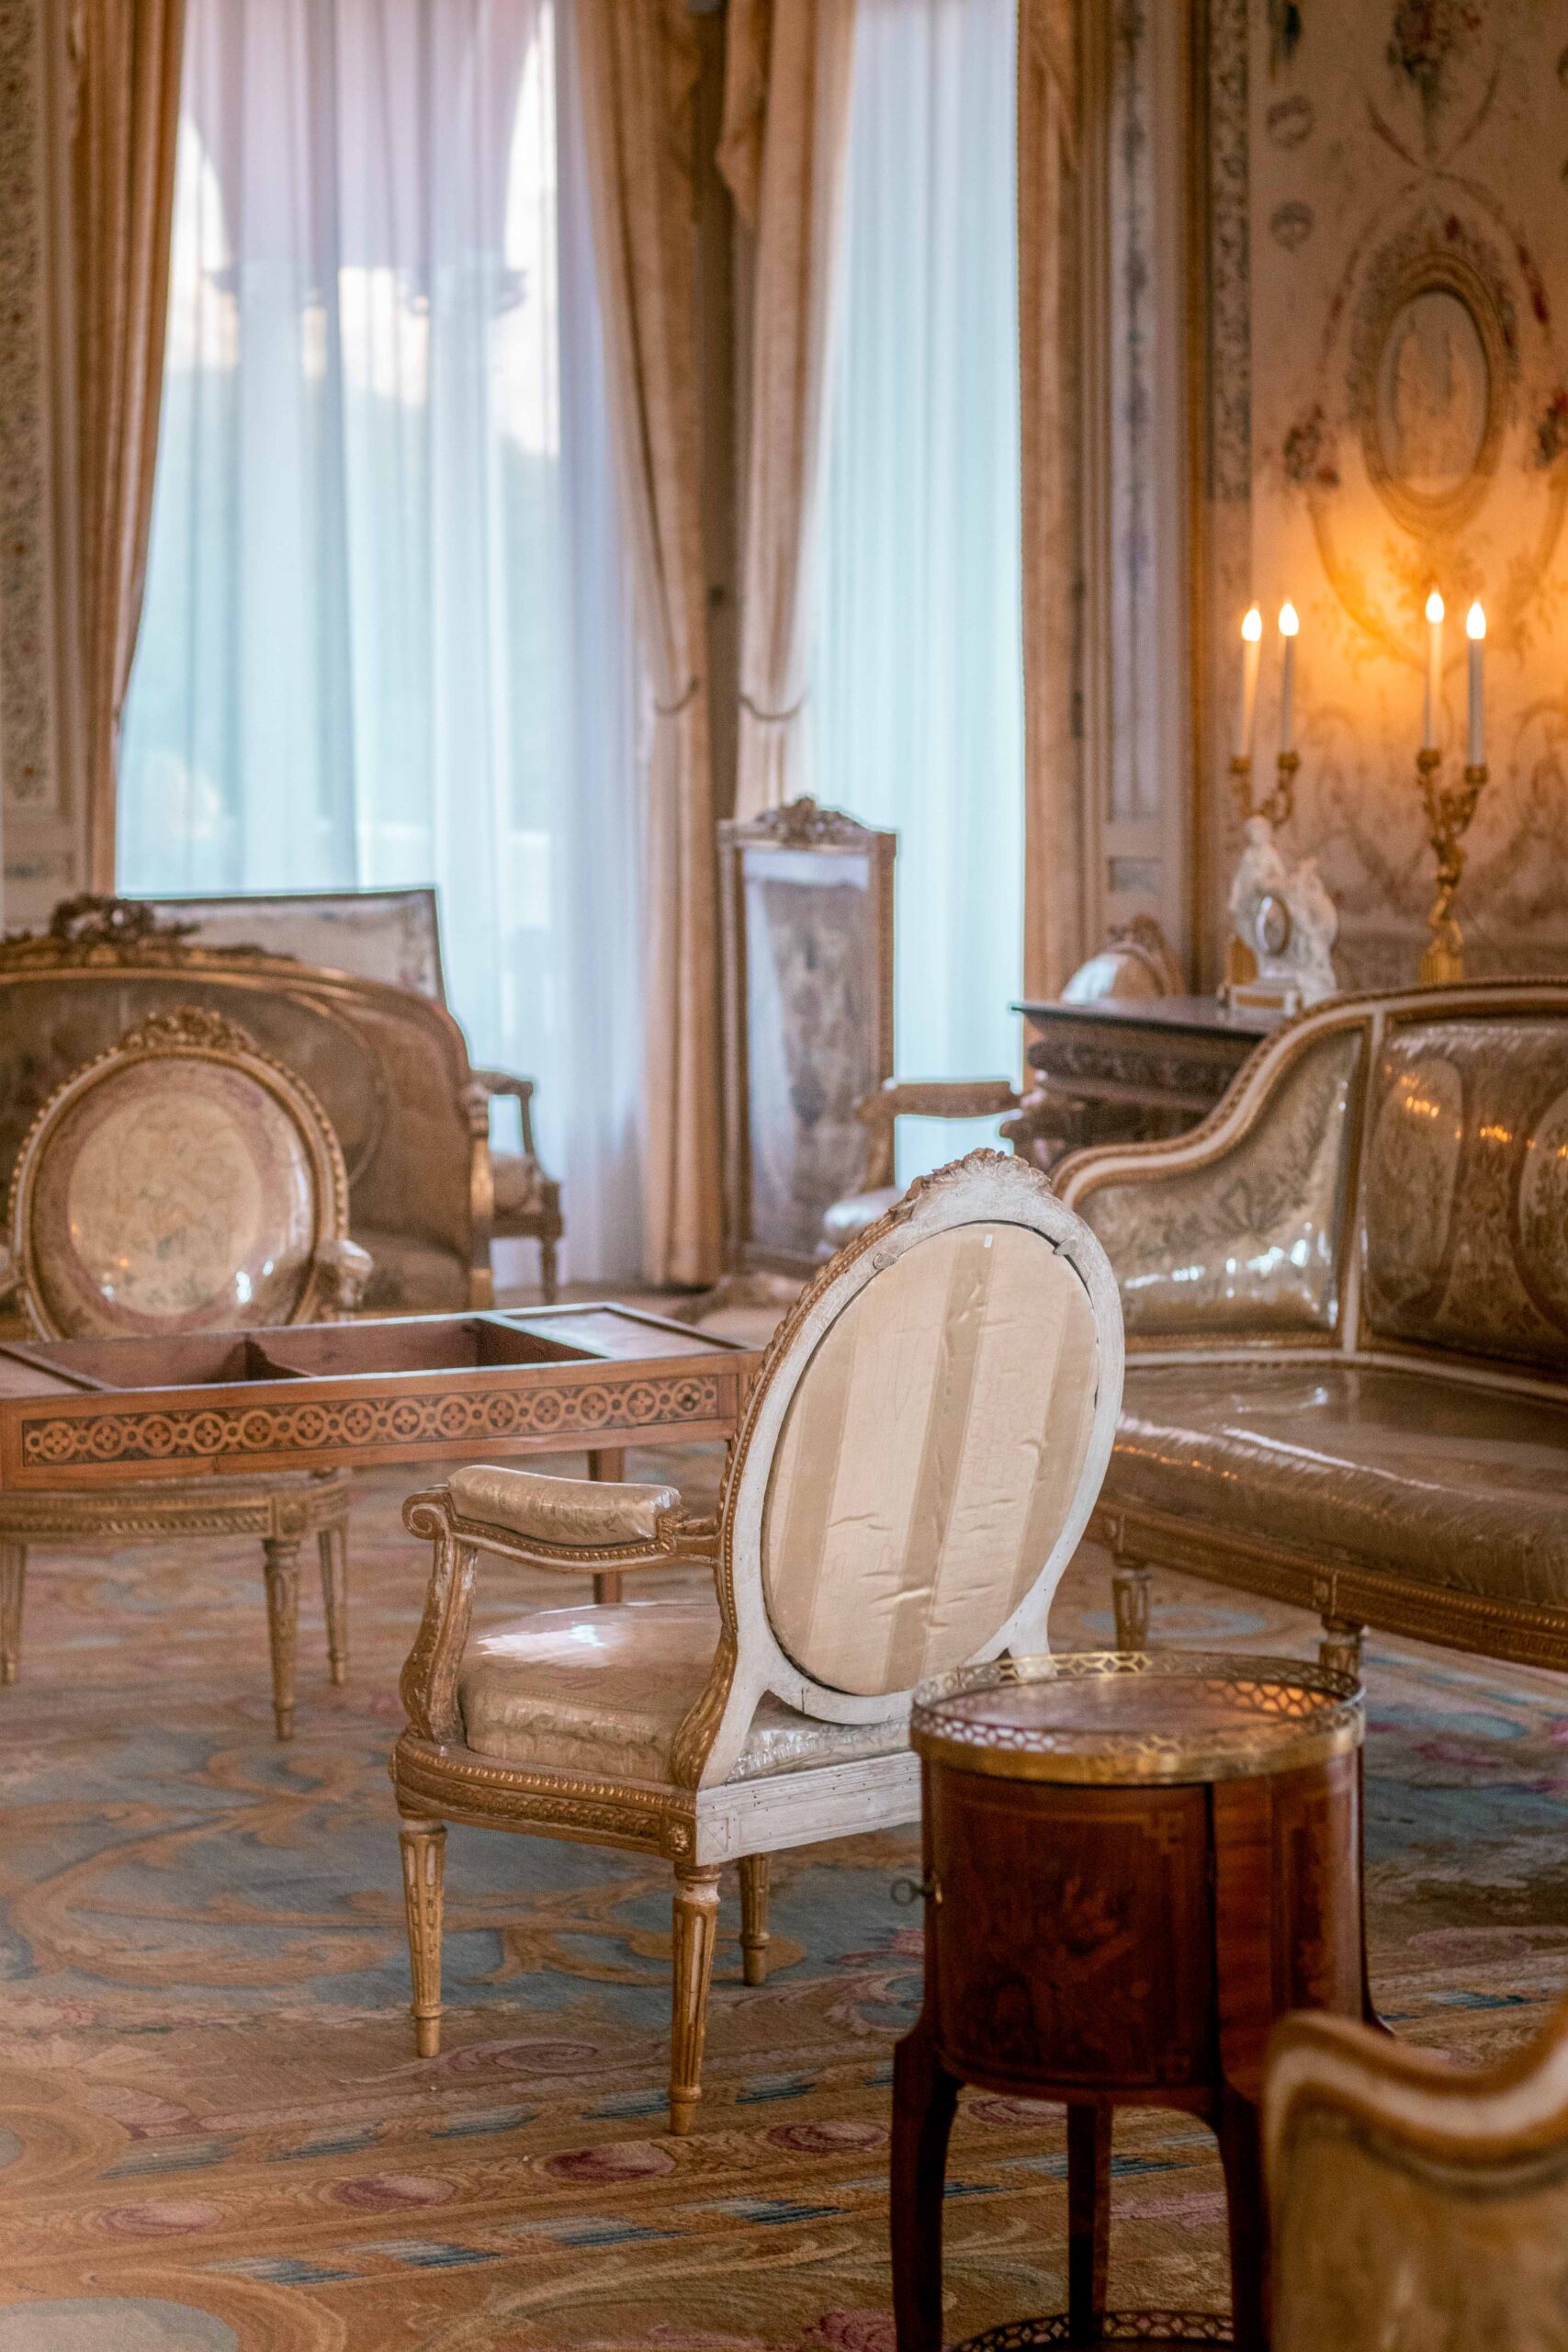 Indoor room of the Villa Ephrussi de Rothschild featuring baroque-style furniture (chairs, table, couch) in Saint-Jean-Cap-Ferrat, France